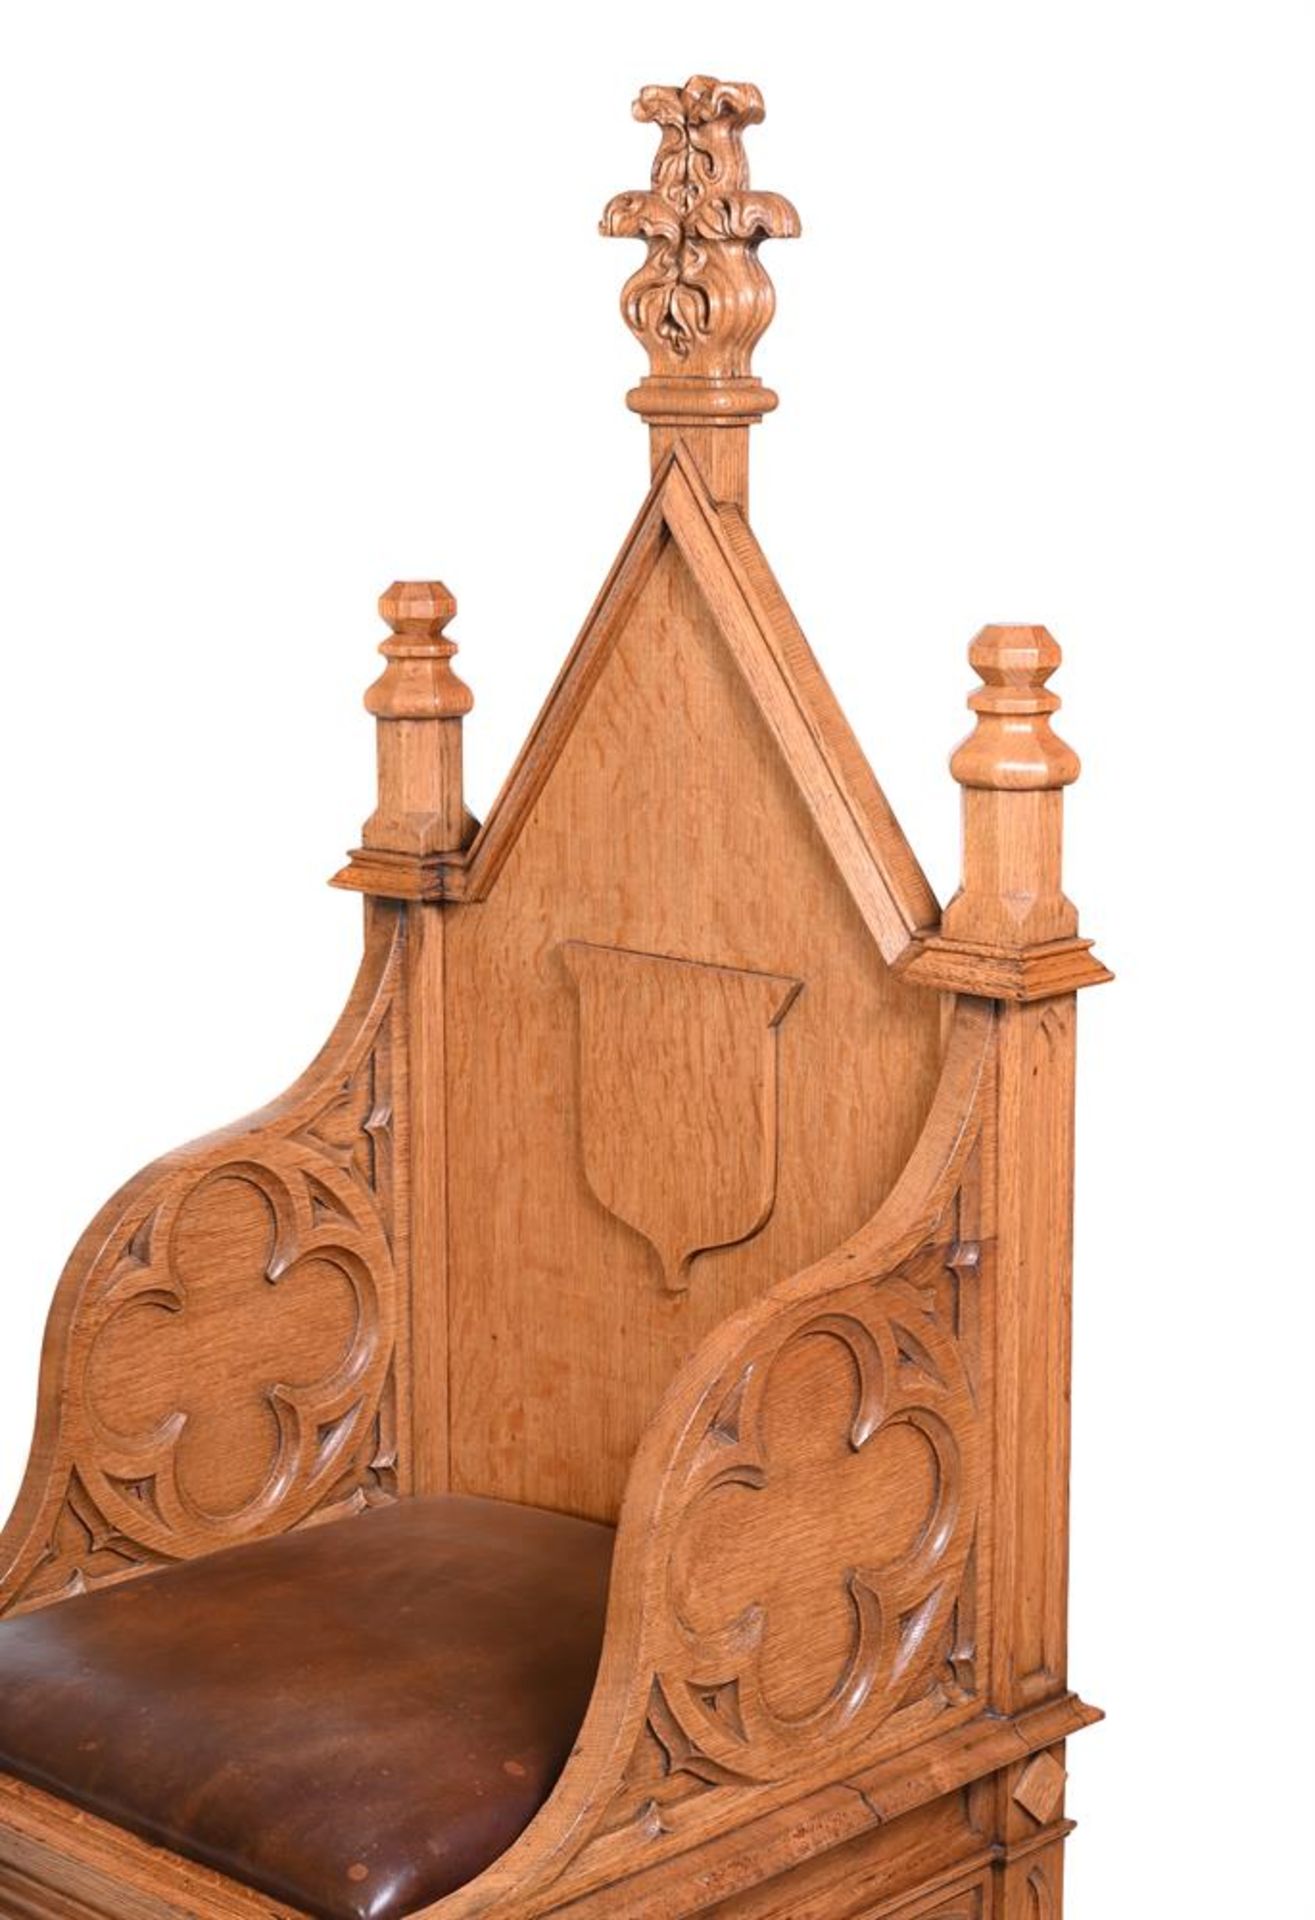 A PAIR OF CARVED OAK THRONE CHAIRSIN GOTHIC REVIVAL TASTE, LATE 19TH/ EARLY 20TH CENTURY - Image 2 of 2